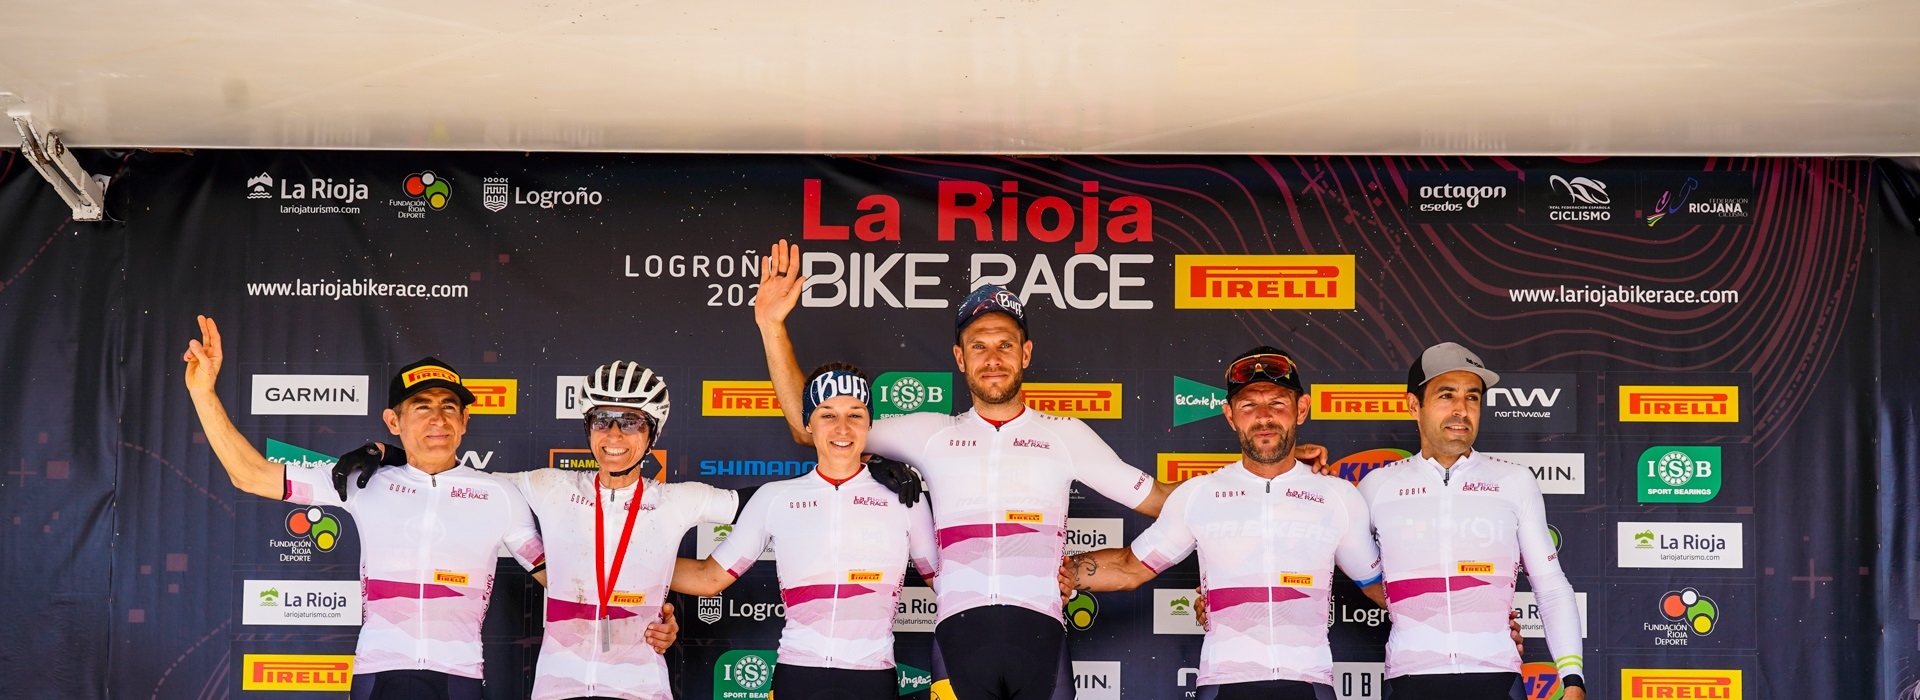 These are the winners of this edition of  La Rioja Bike Race presented by Pirelli